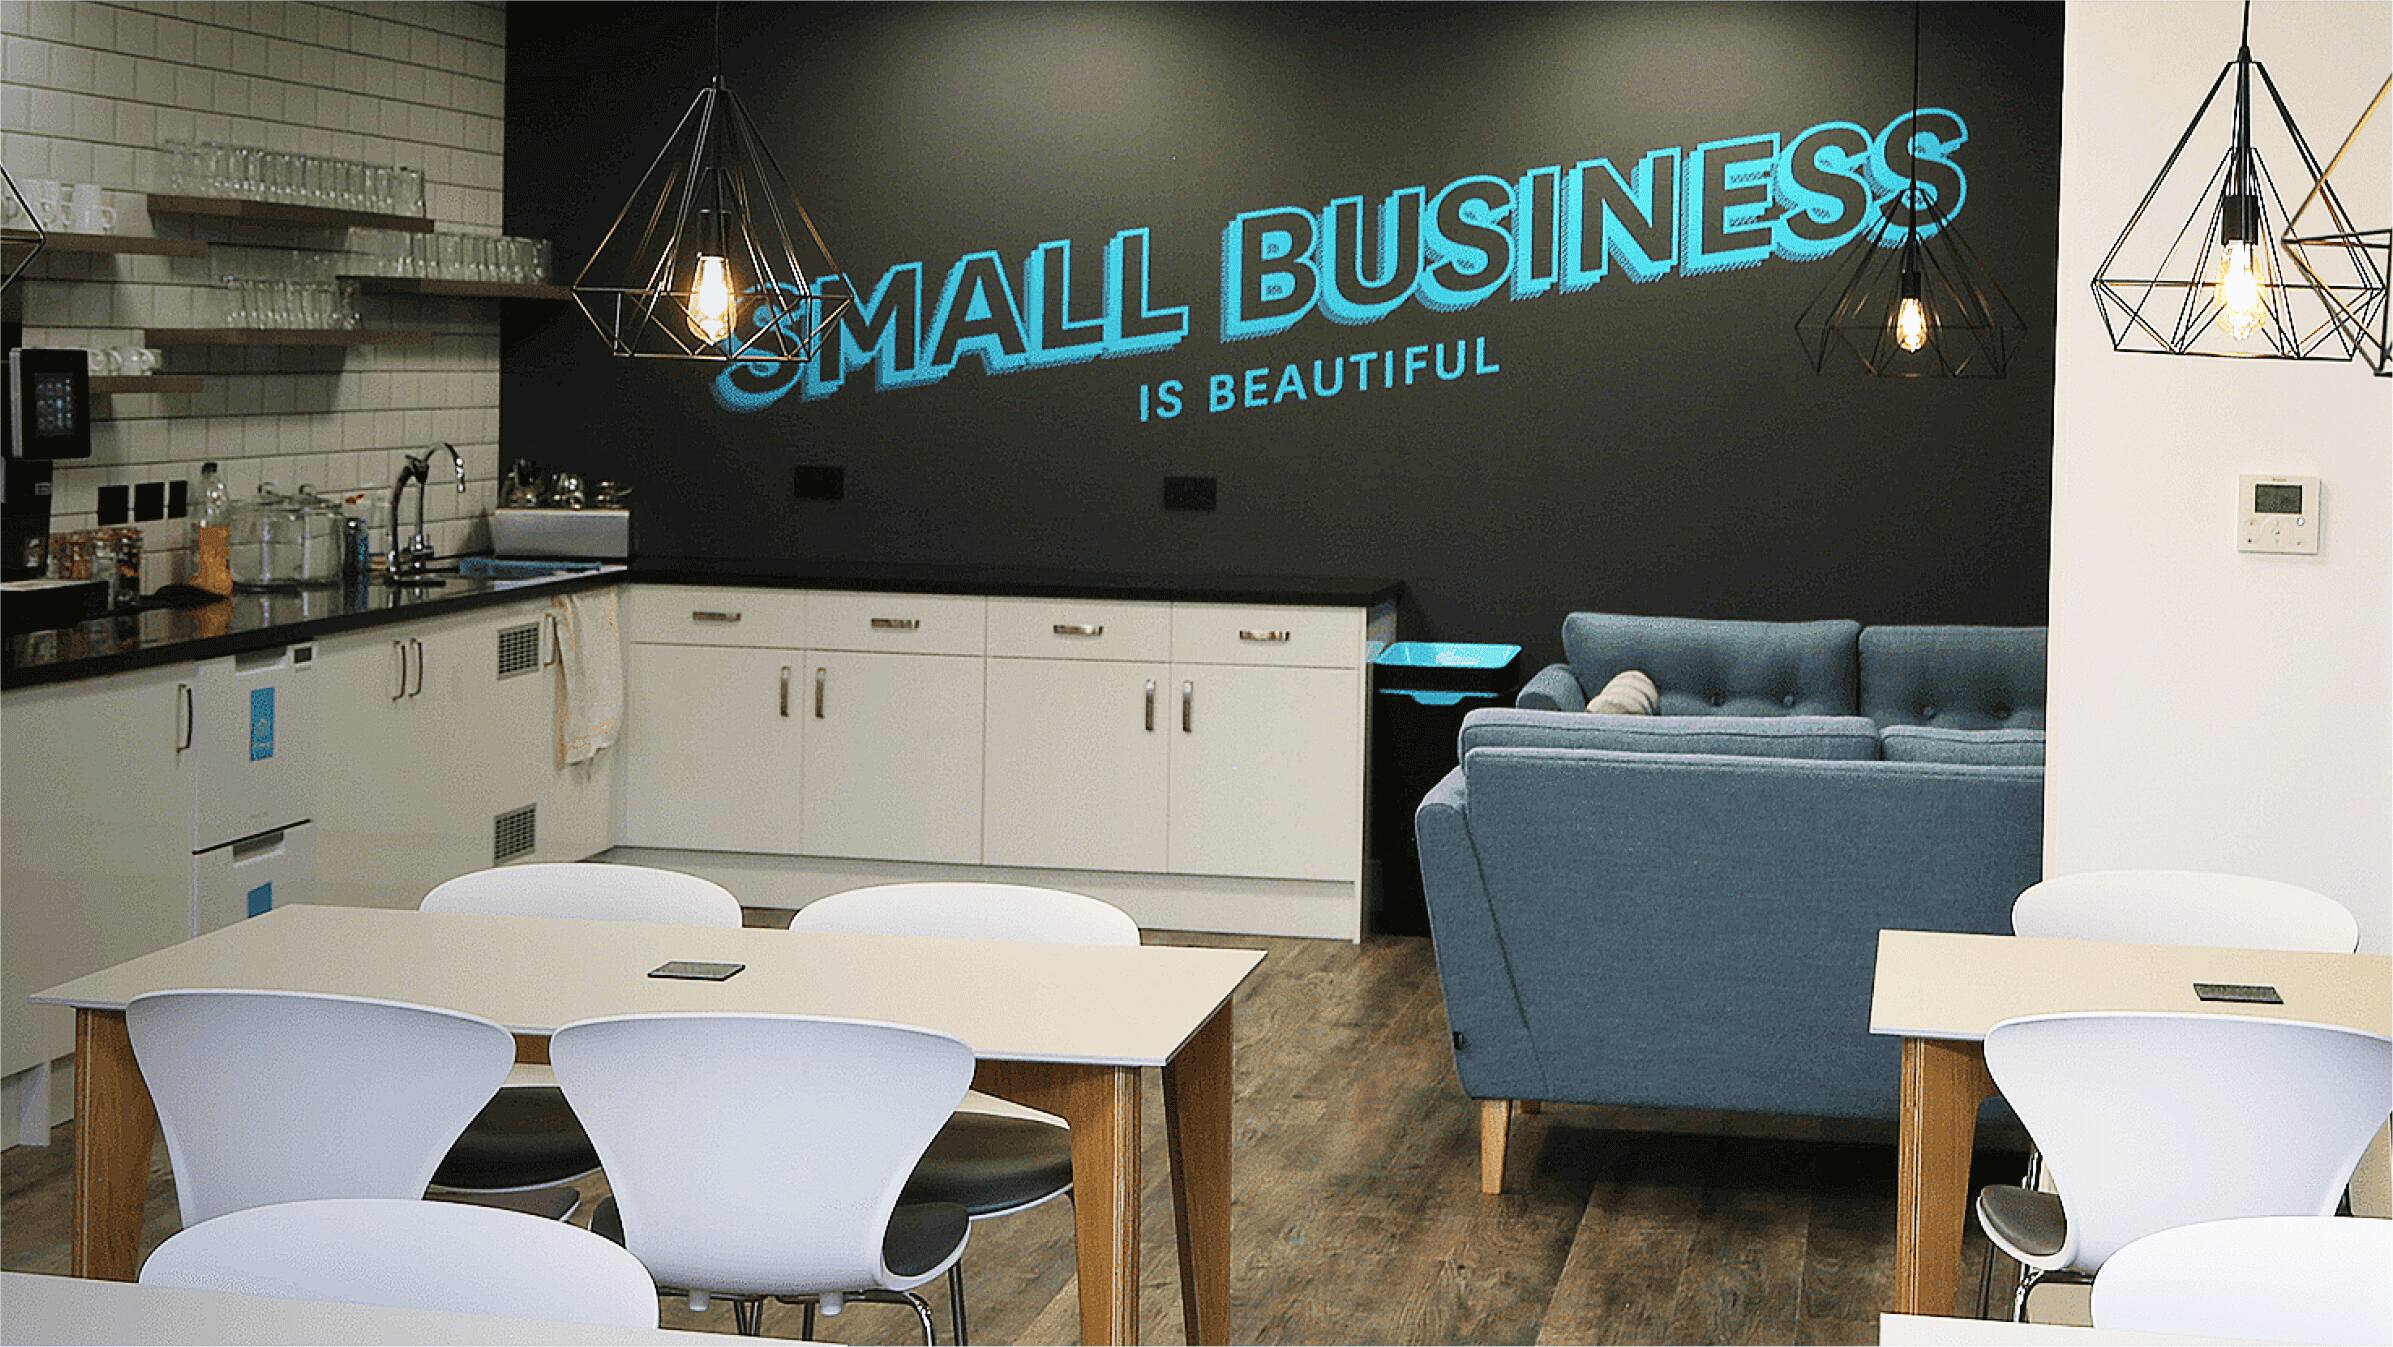 An office kitchen and dining area with ‘Small business is beautiful’ in large lettering painted on the wall.